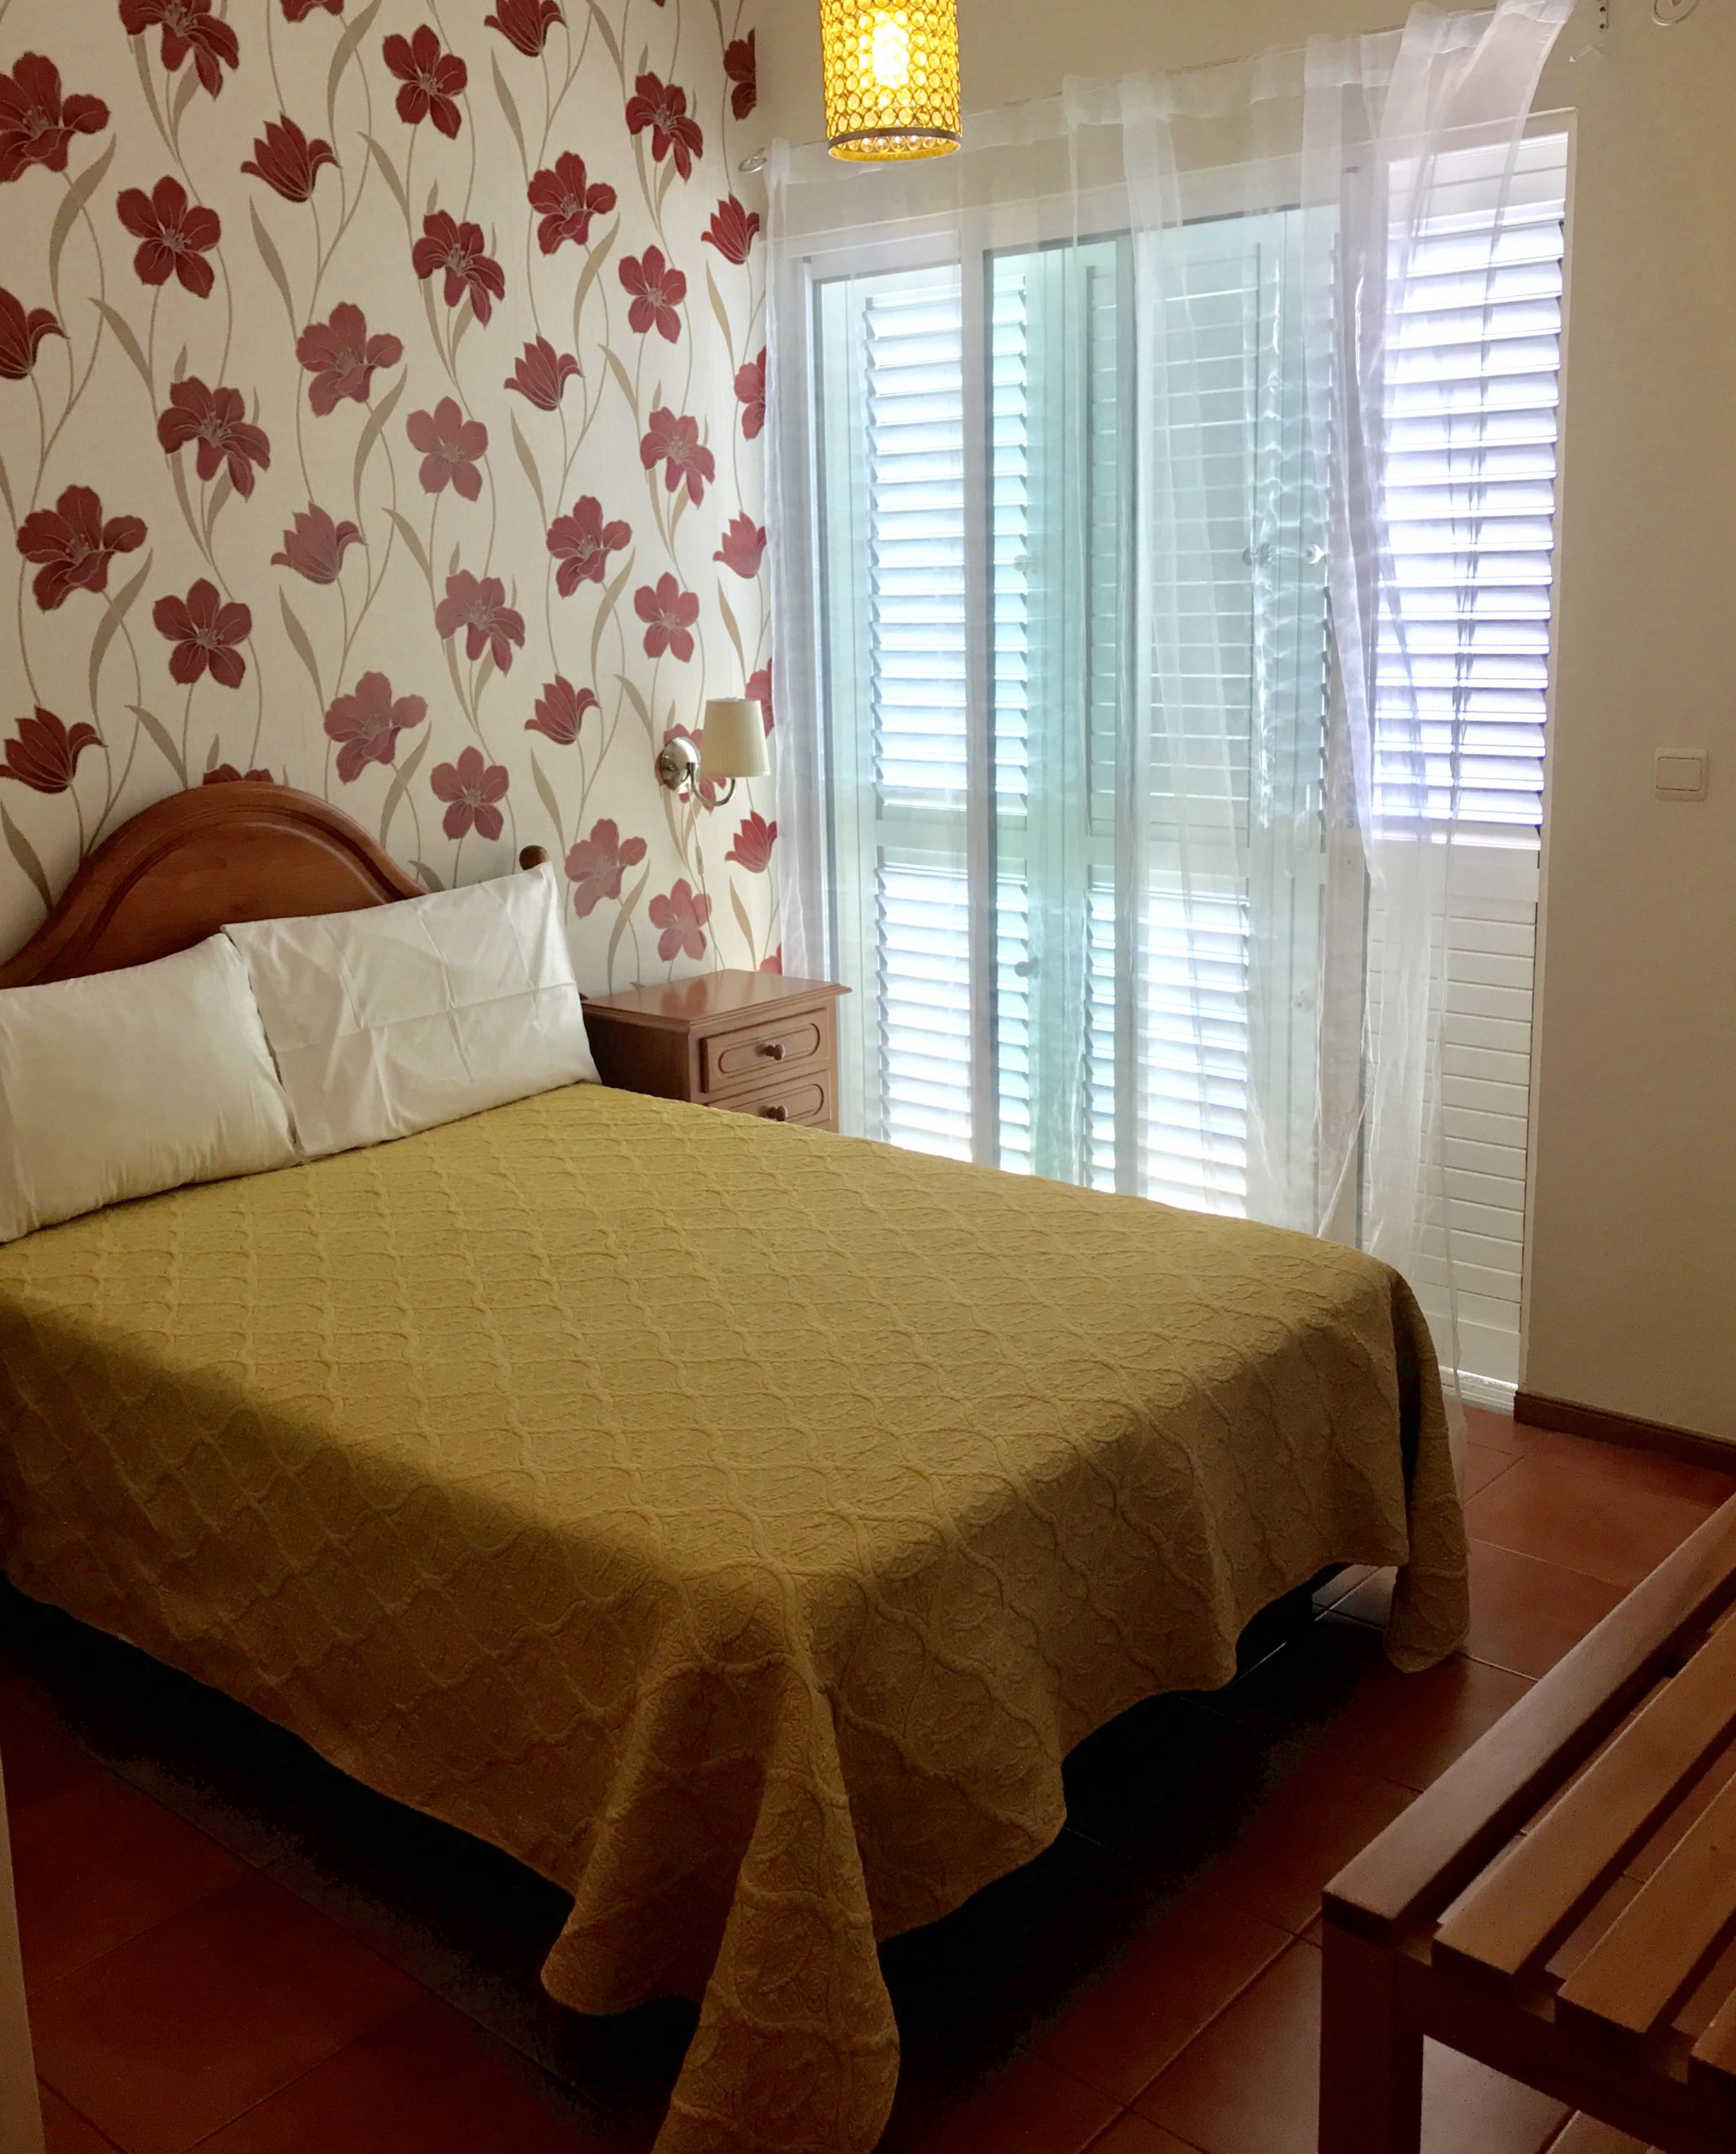 Our spacious villa offers a selection of rooms